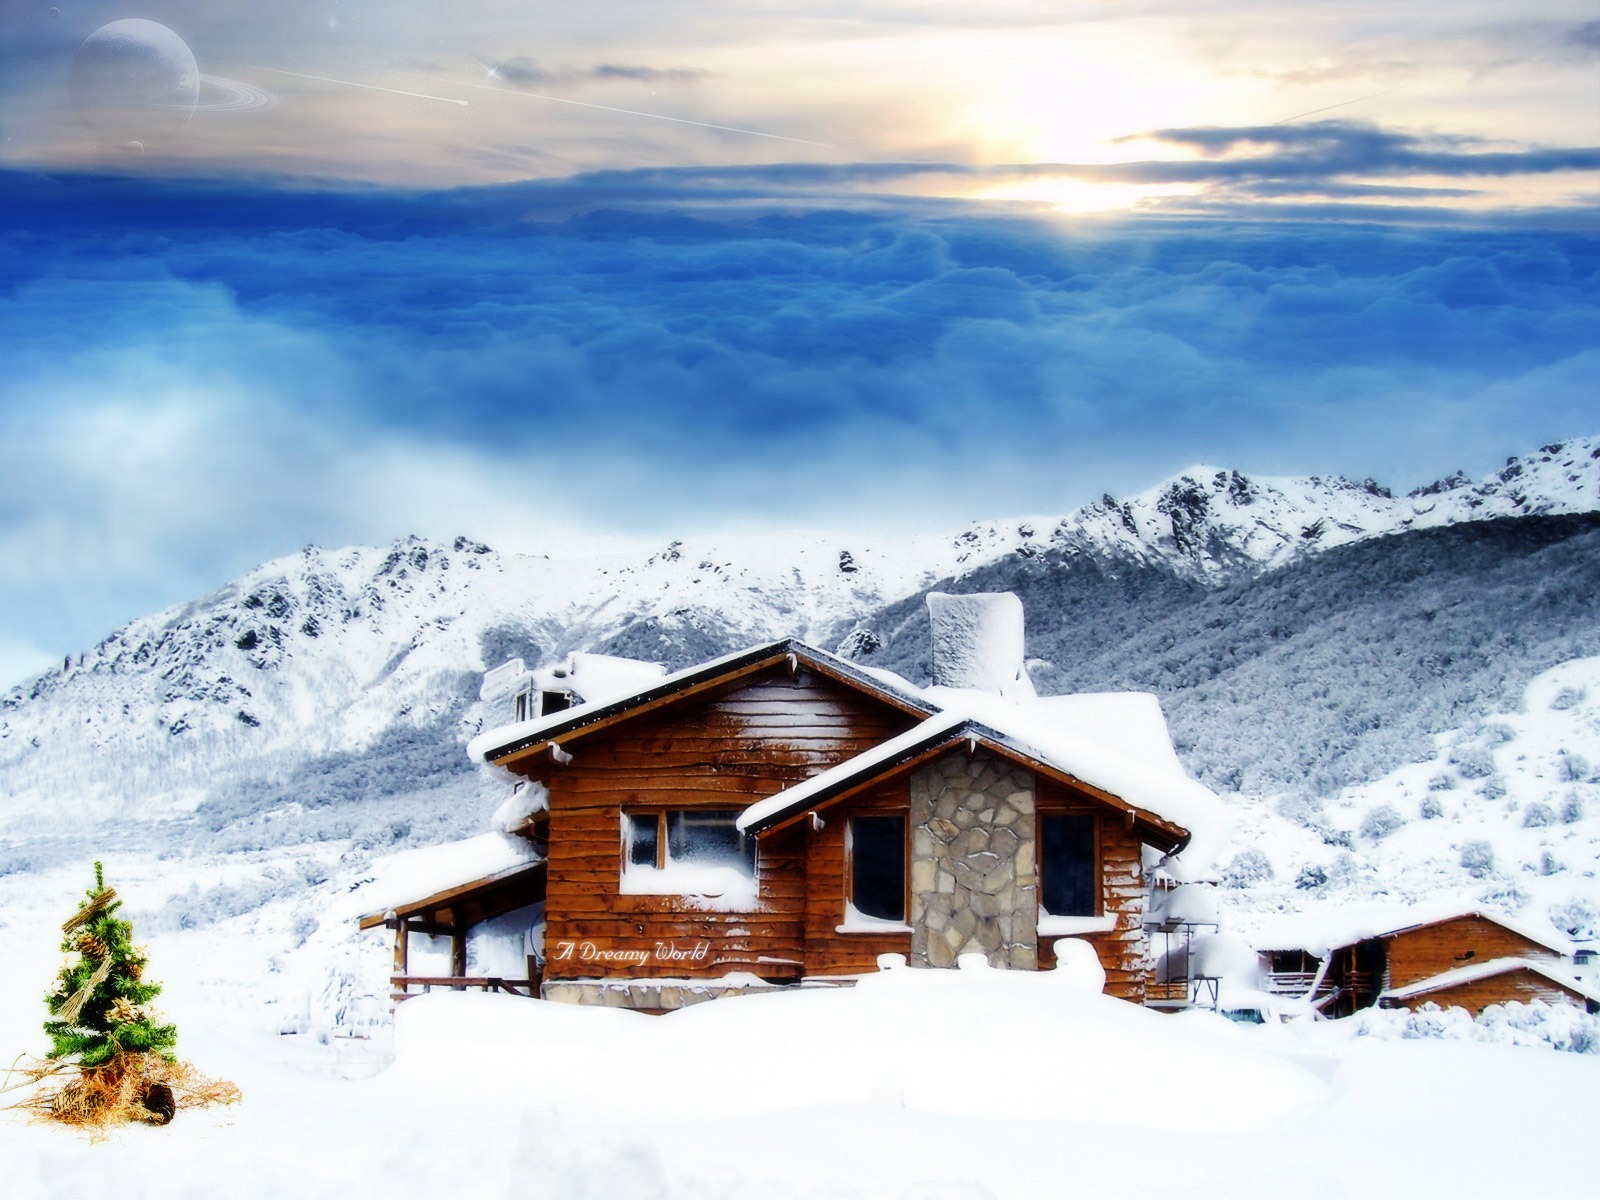 Cottage In The Mountains Winter At Christmas Wallpaper Jpg